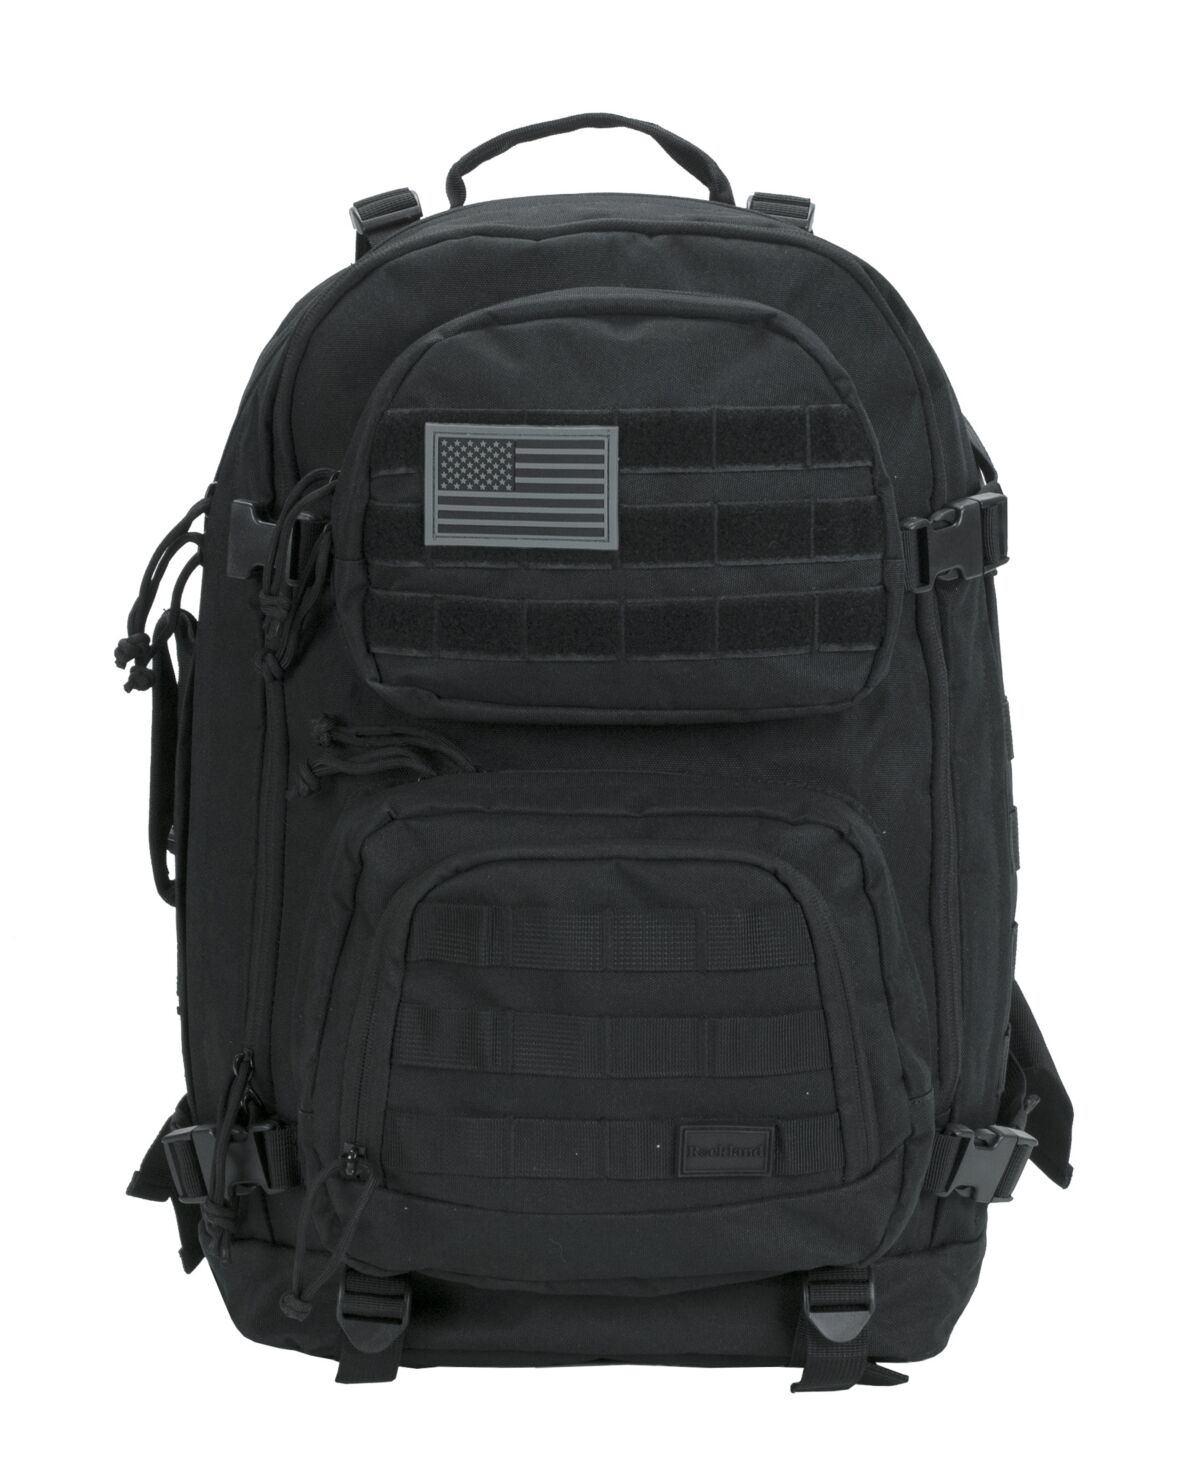 Rockland Military Tactical Laptop Backpack - Black